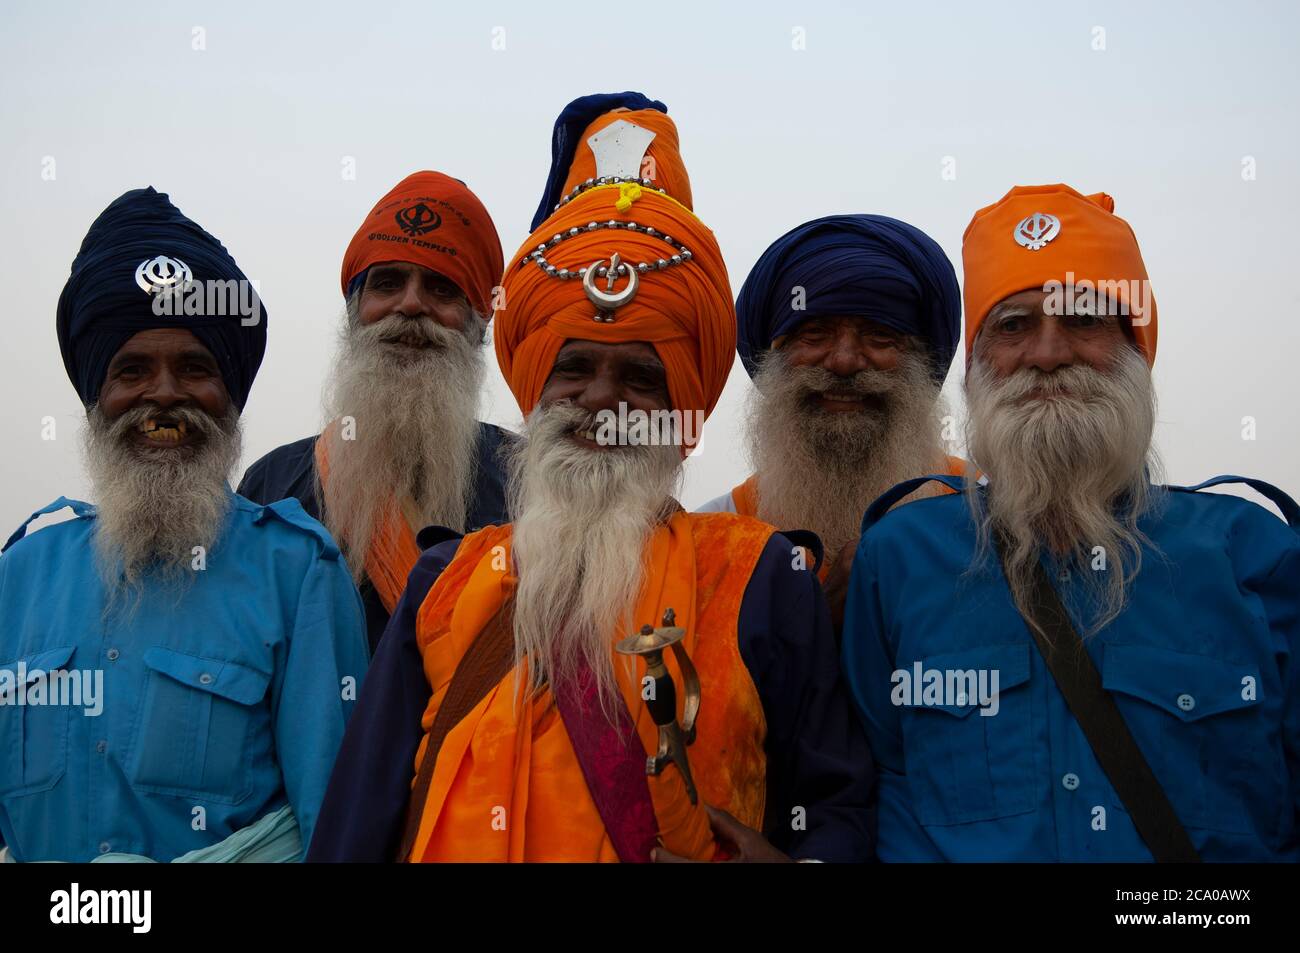 Smiling Sikh devotees on visit to the Golden Temple, Amritsar ,Punjab, India Stock Photo